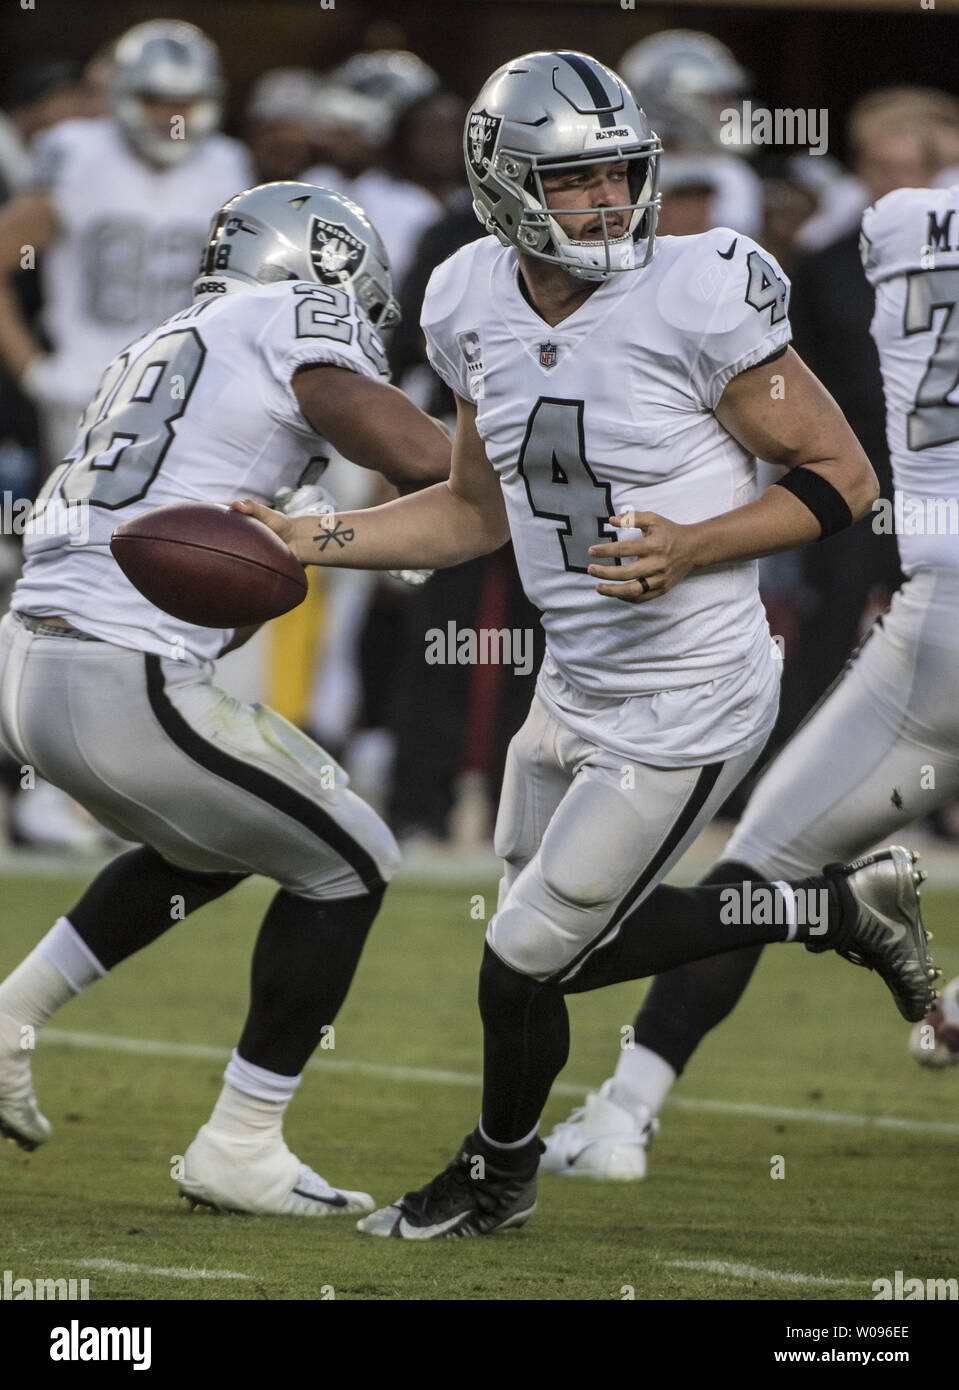 Oakland Raiders quarterback Derek Carr (4) drops back in the first quarter against the San Francisco 49ers in the first quarter at Levi's Stadium in Santa Clara, California on November 1, 2018. The Raiders lost 34-3 to tie the New York Giants at the bottom of the NFL.   Photo by Terry Schmitt/UPI Stock Photo